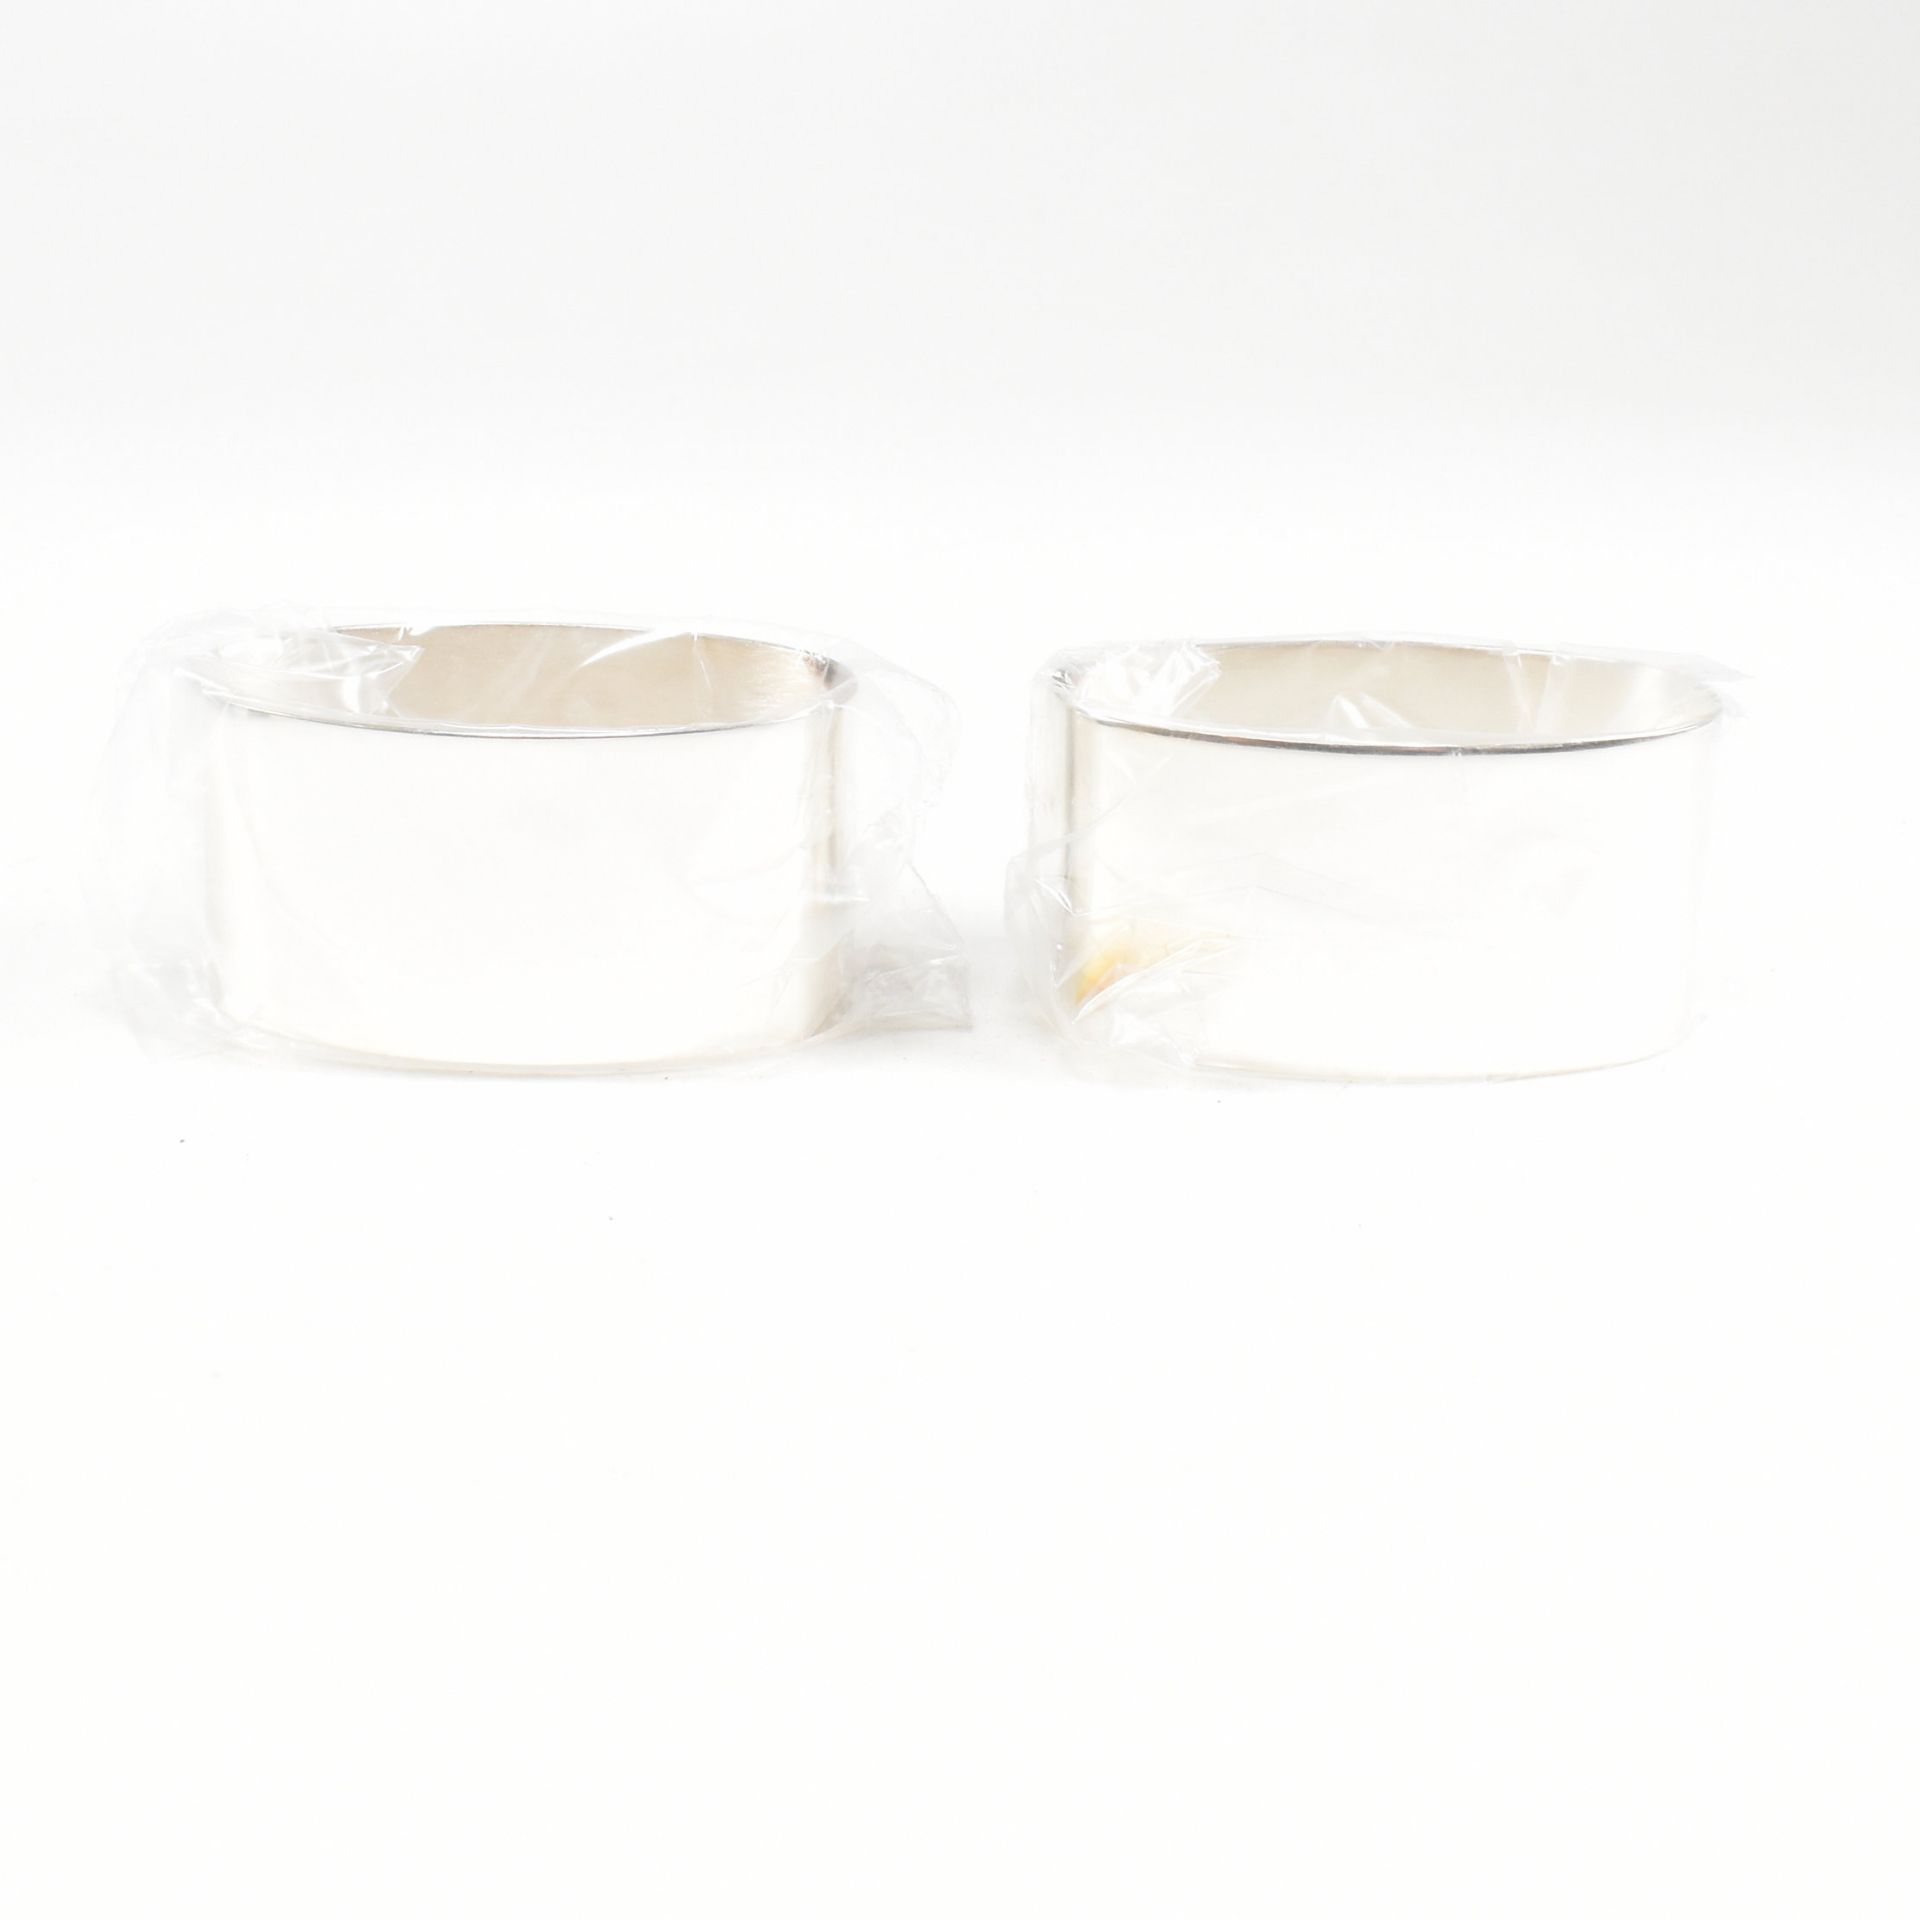 1990S CASED PAIR OF NAPKIN RINGS - Image 9 of 11